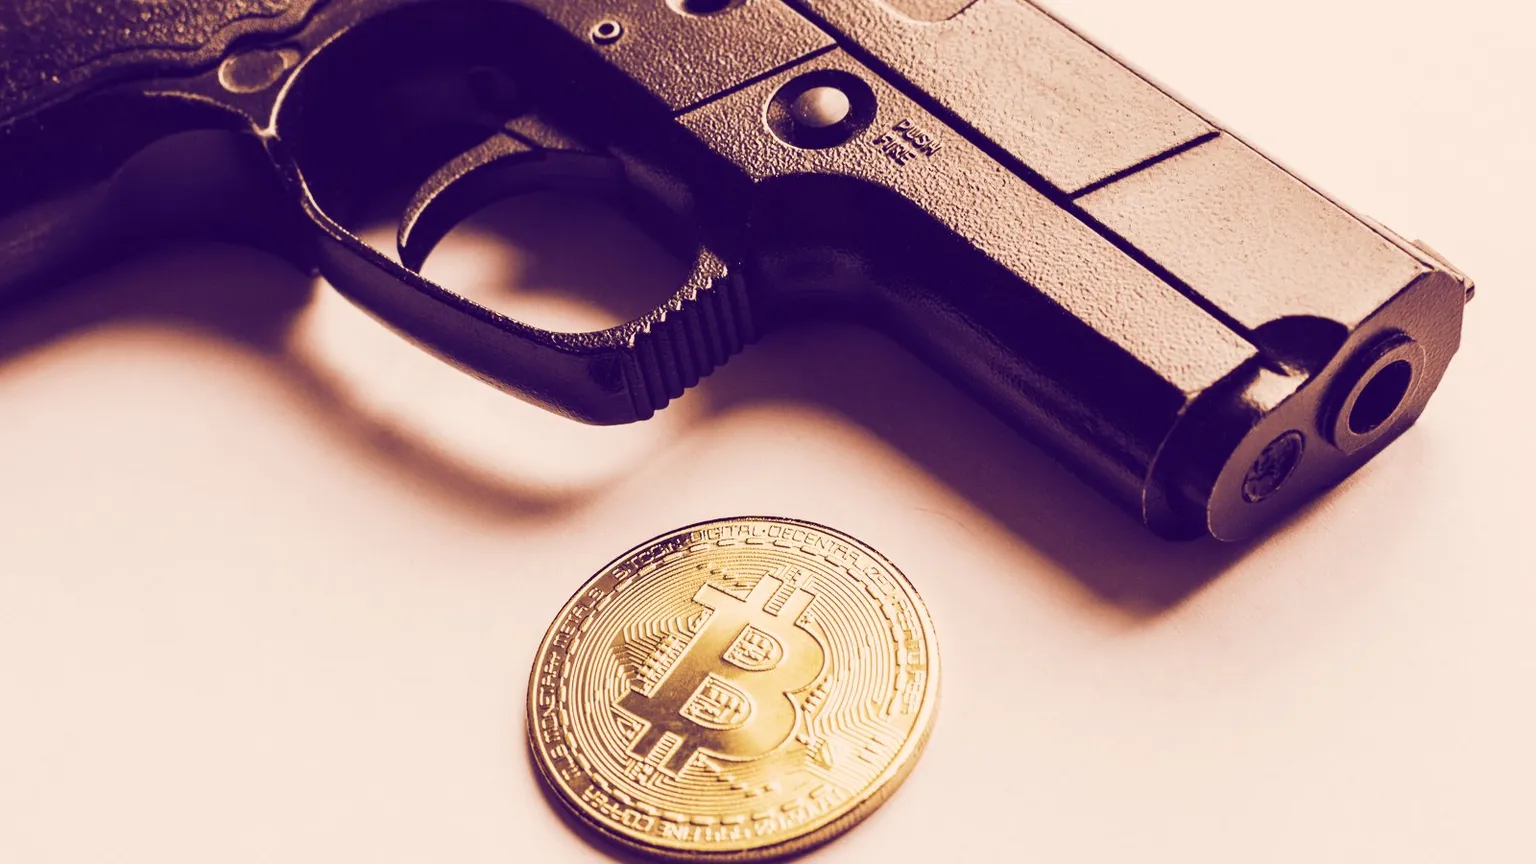 Bitcoin's falling hash rate could make the network more vulnerable. Image: Shutterstock